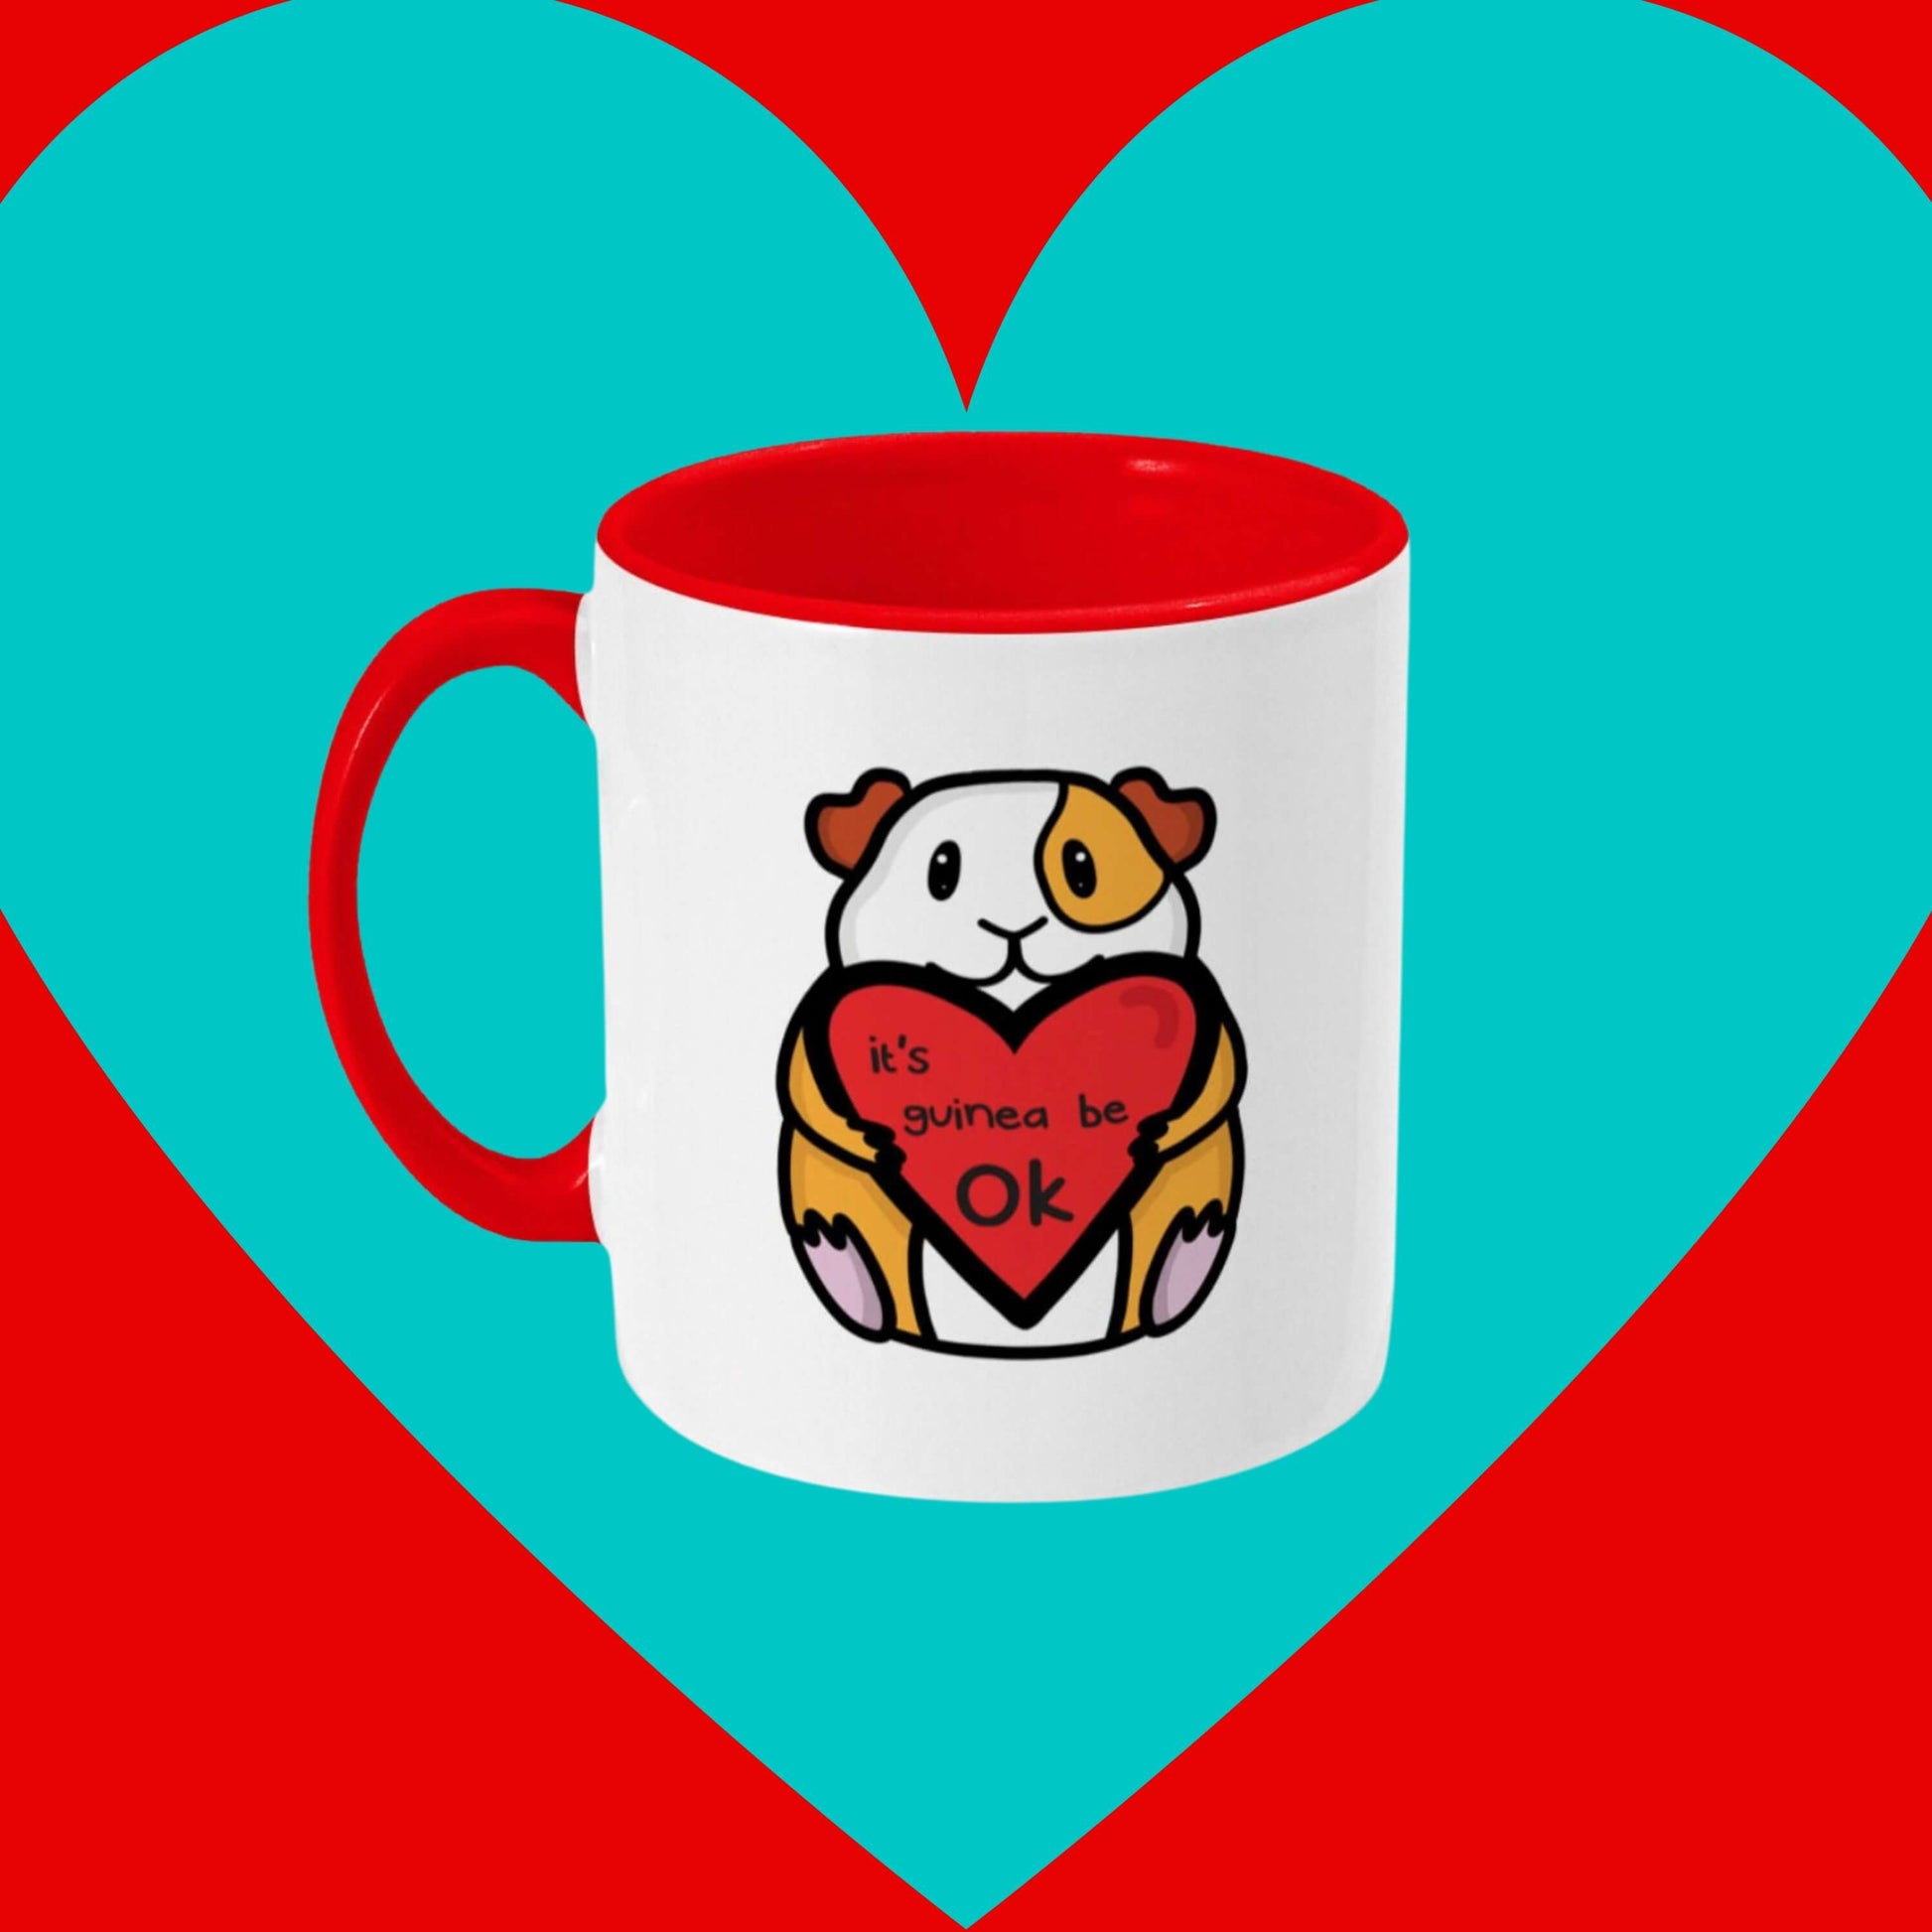 The It's Gonna Be OK Guinea Pig Mug on a red and blue background. The white mug has a red inside and handle with a front print of a orange and white guinea pig smiling holding a red heart with black text reading 'it's guinea be ok'. The hand drawn design is a reminder of staying positive.